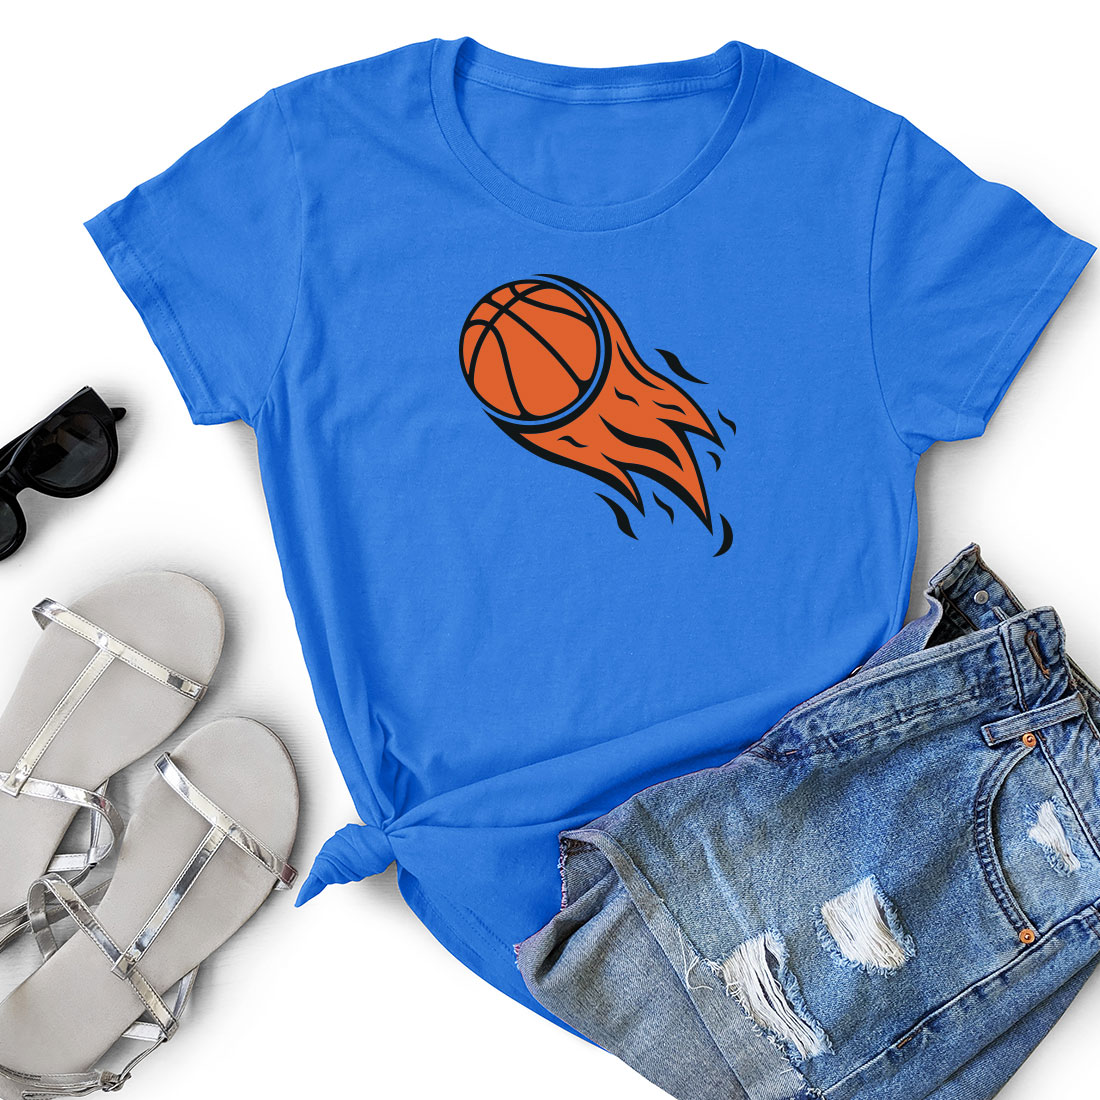 Women's t - shirt with a basketball on it.